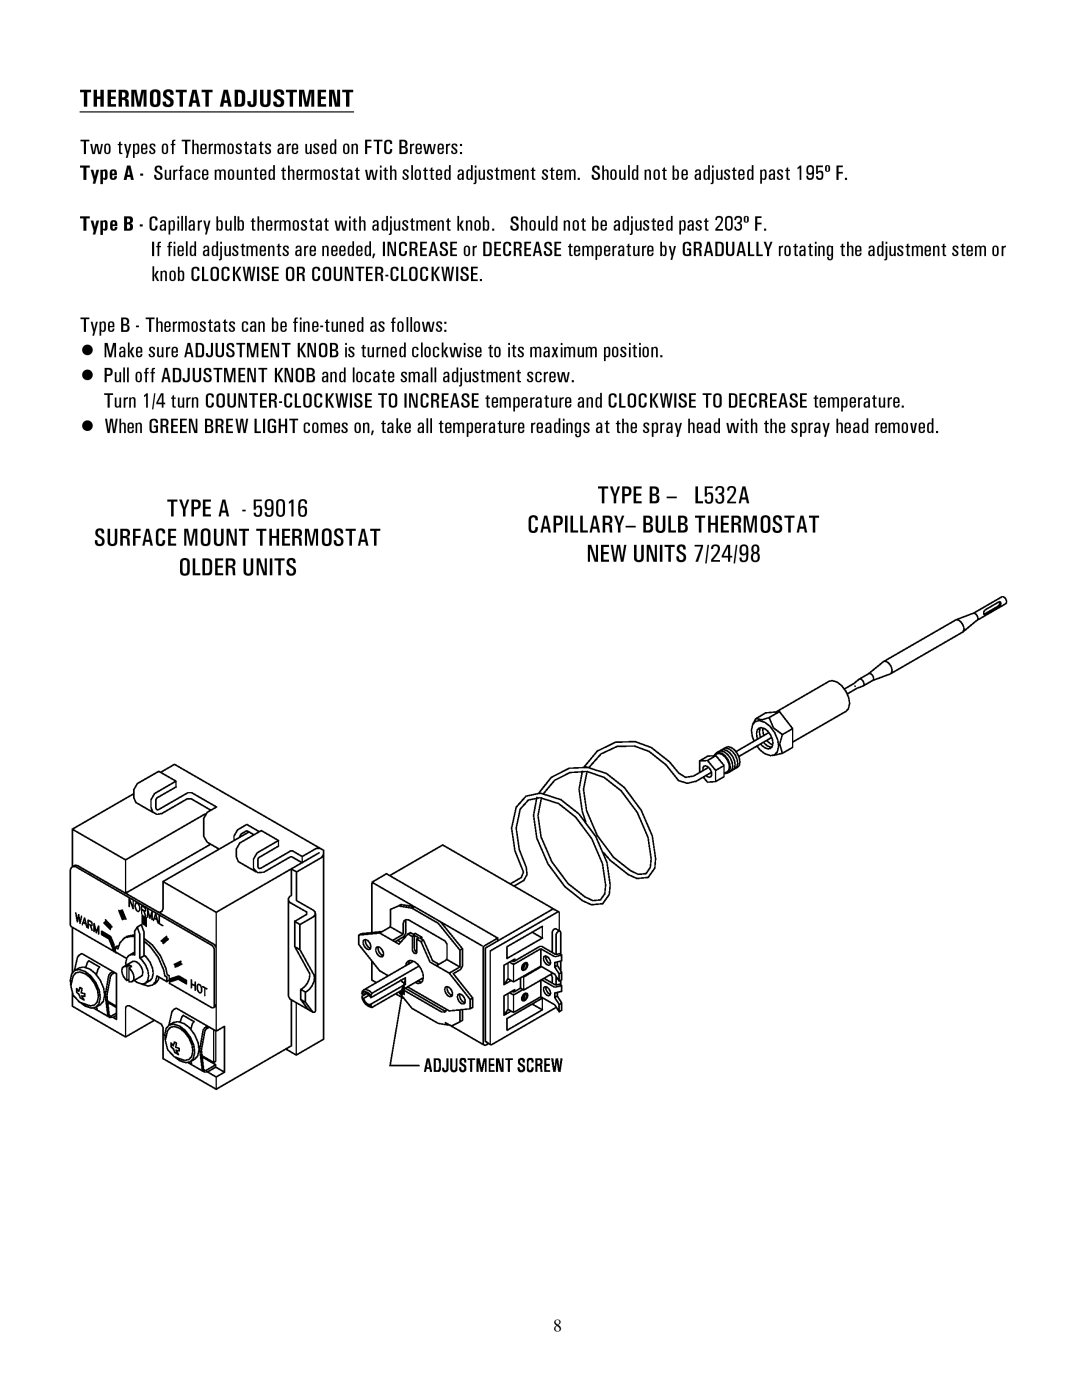 Cecilware FTC-5, FTC-10 manual Thermostat Adjustment 